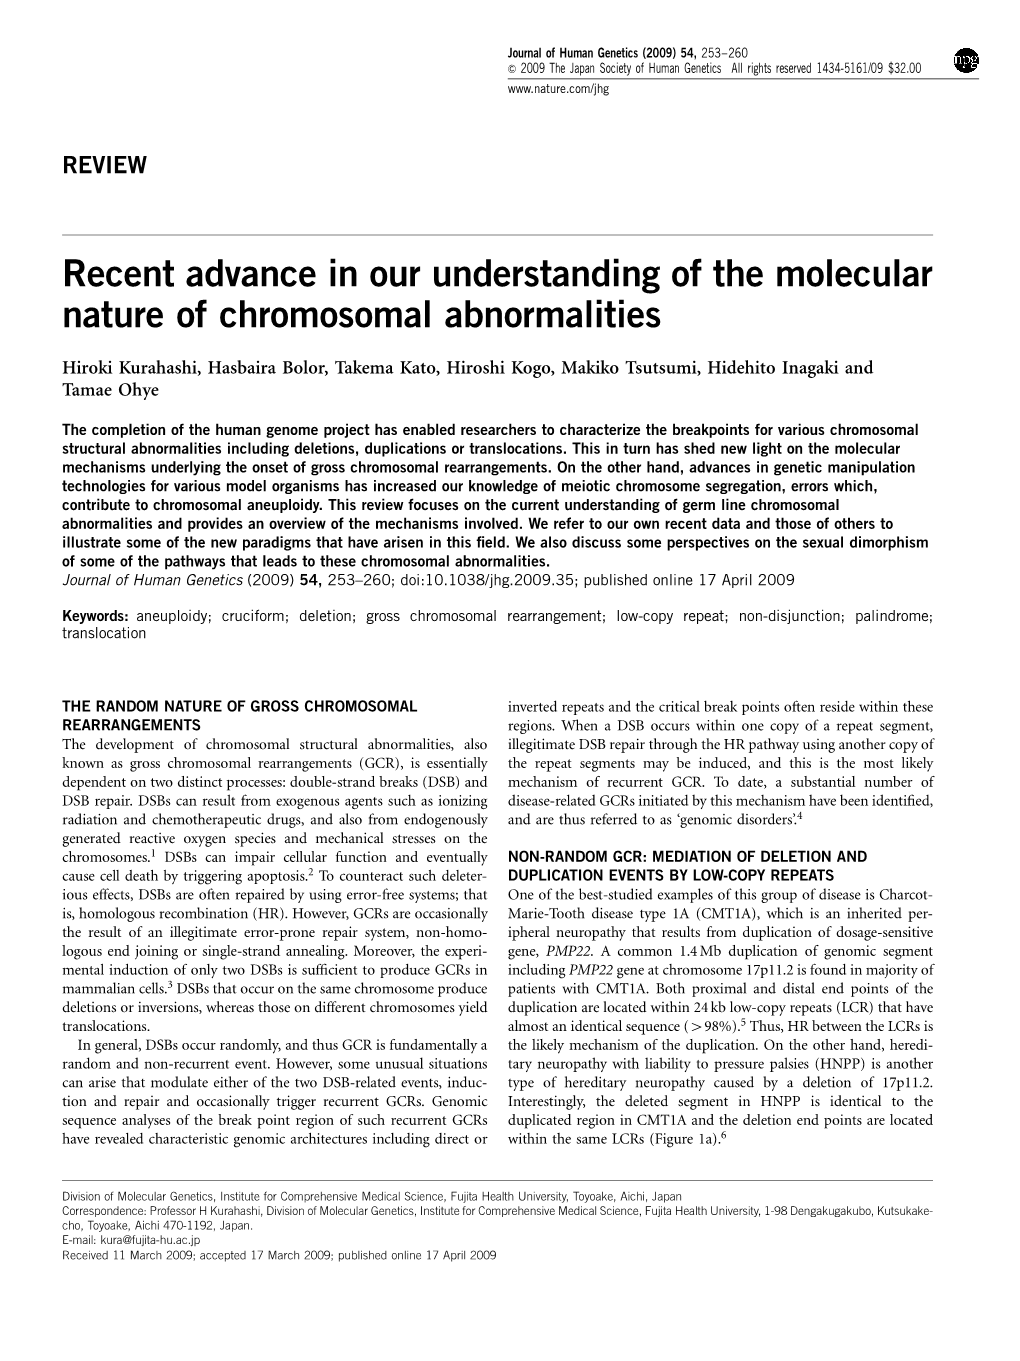 Recent Advance in Our Understanding of the Molecular Nature of Chromosomal Abnormalities